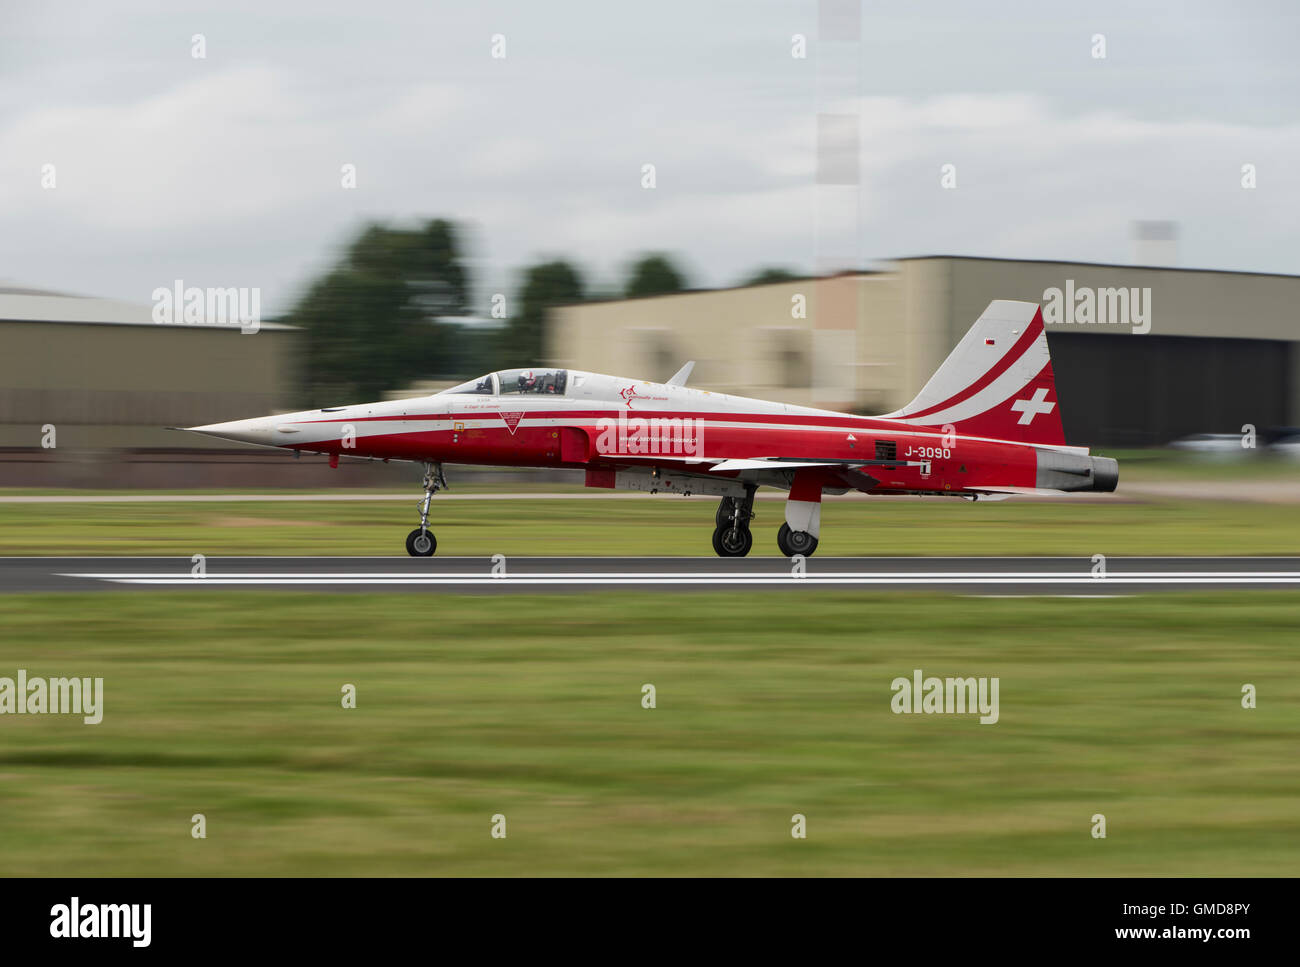 A sleek Northrop F-5E Tiger II from the Swiss Air Force aerobatic display team The Patrouille Suisse lands at Fairford Stock Photo